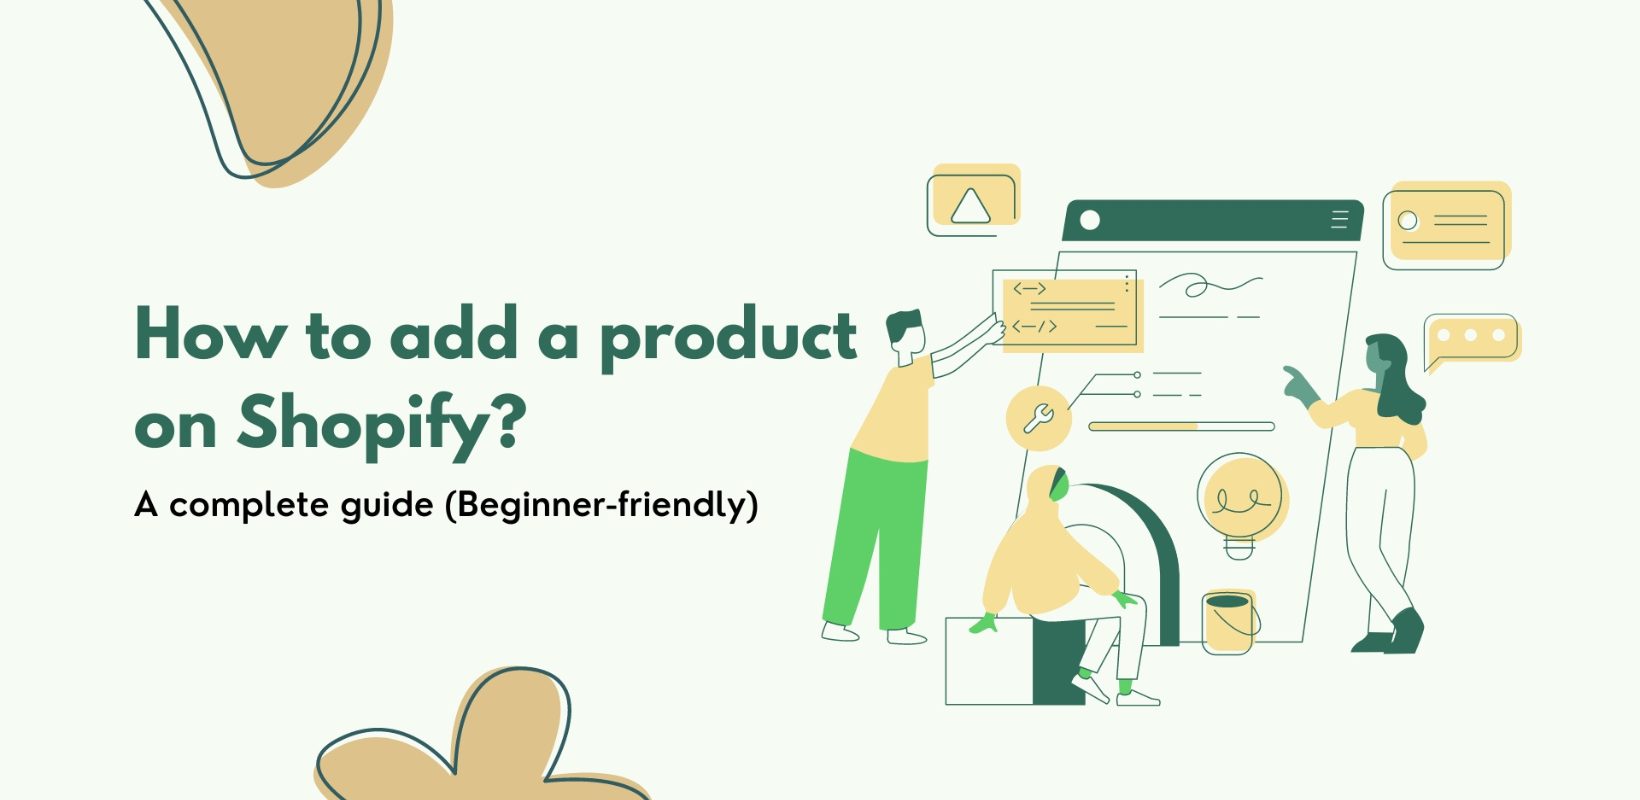 How to Add Product on Shopify - A Quick Guide for Beginners